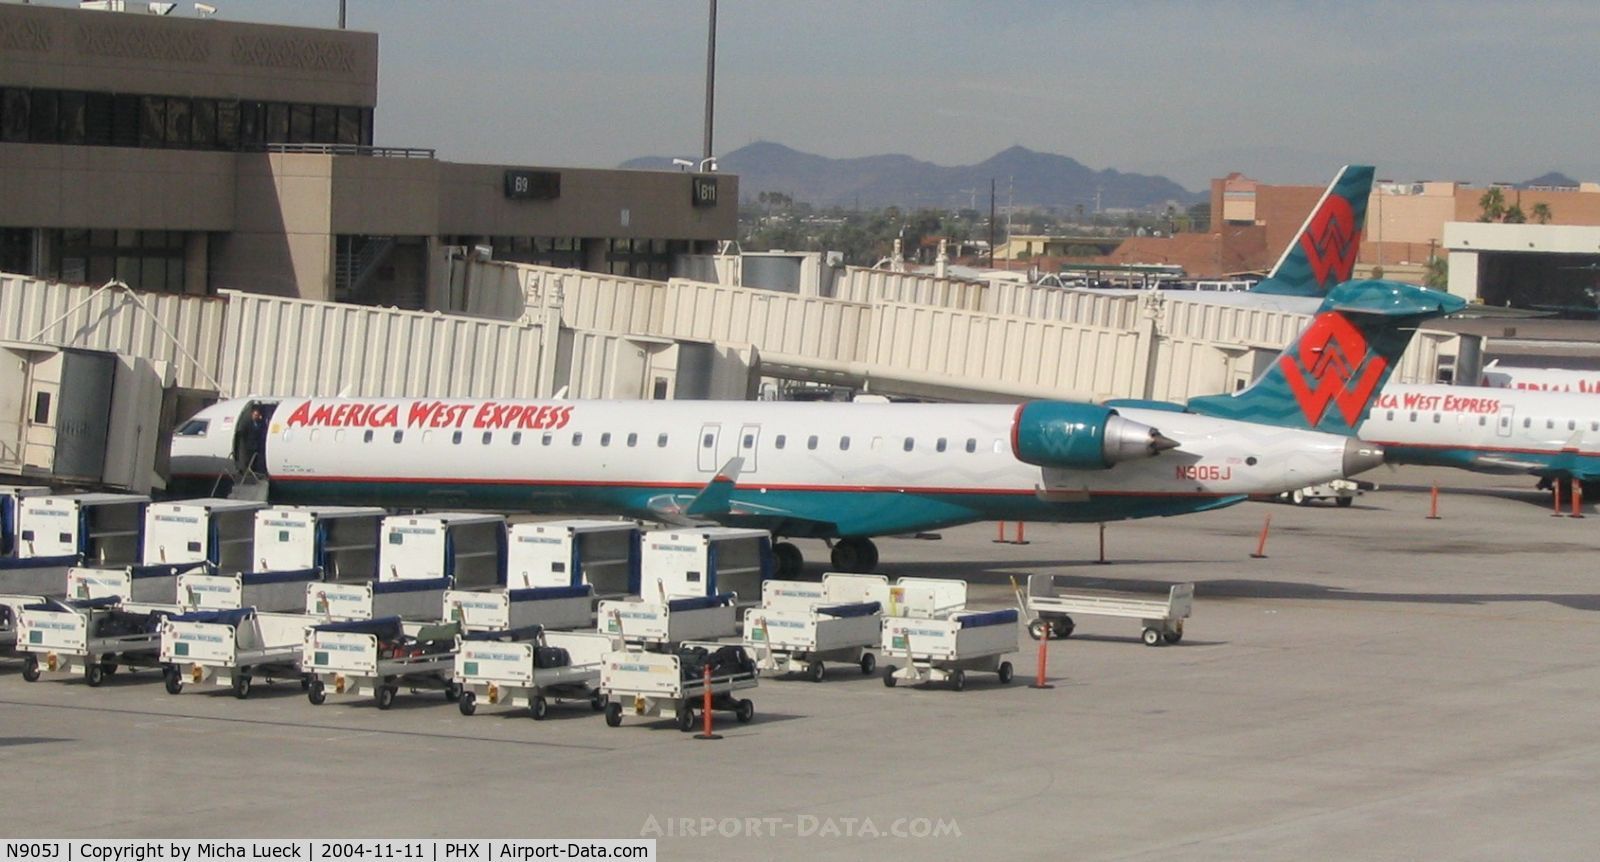 N905J, 2003 Bombardier CRJ-900 (CL-600-2D24) C/N 15005, Freedom Airlines for America West Express